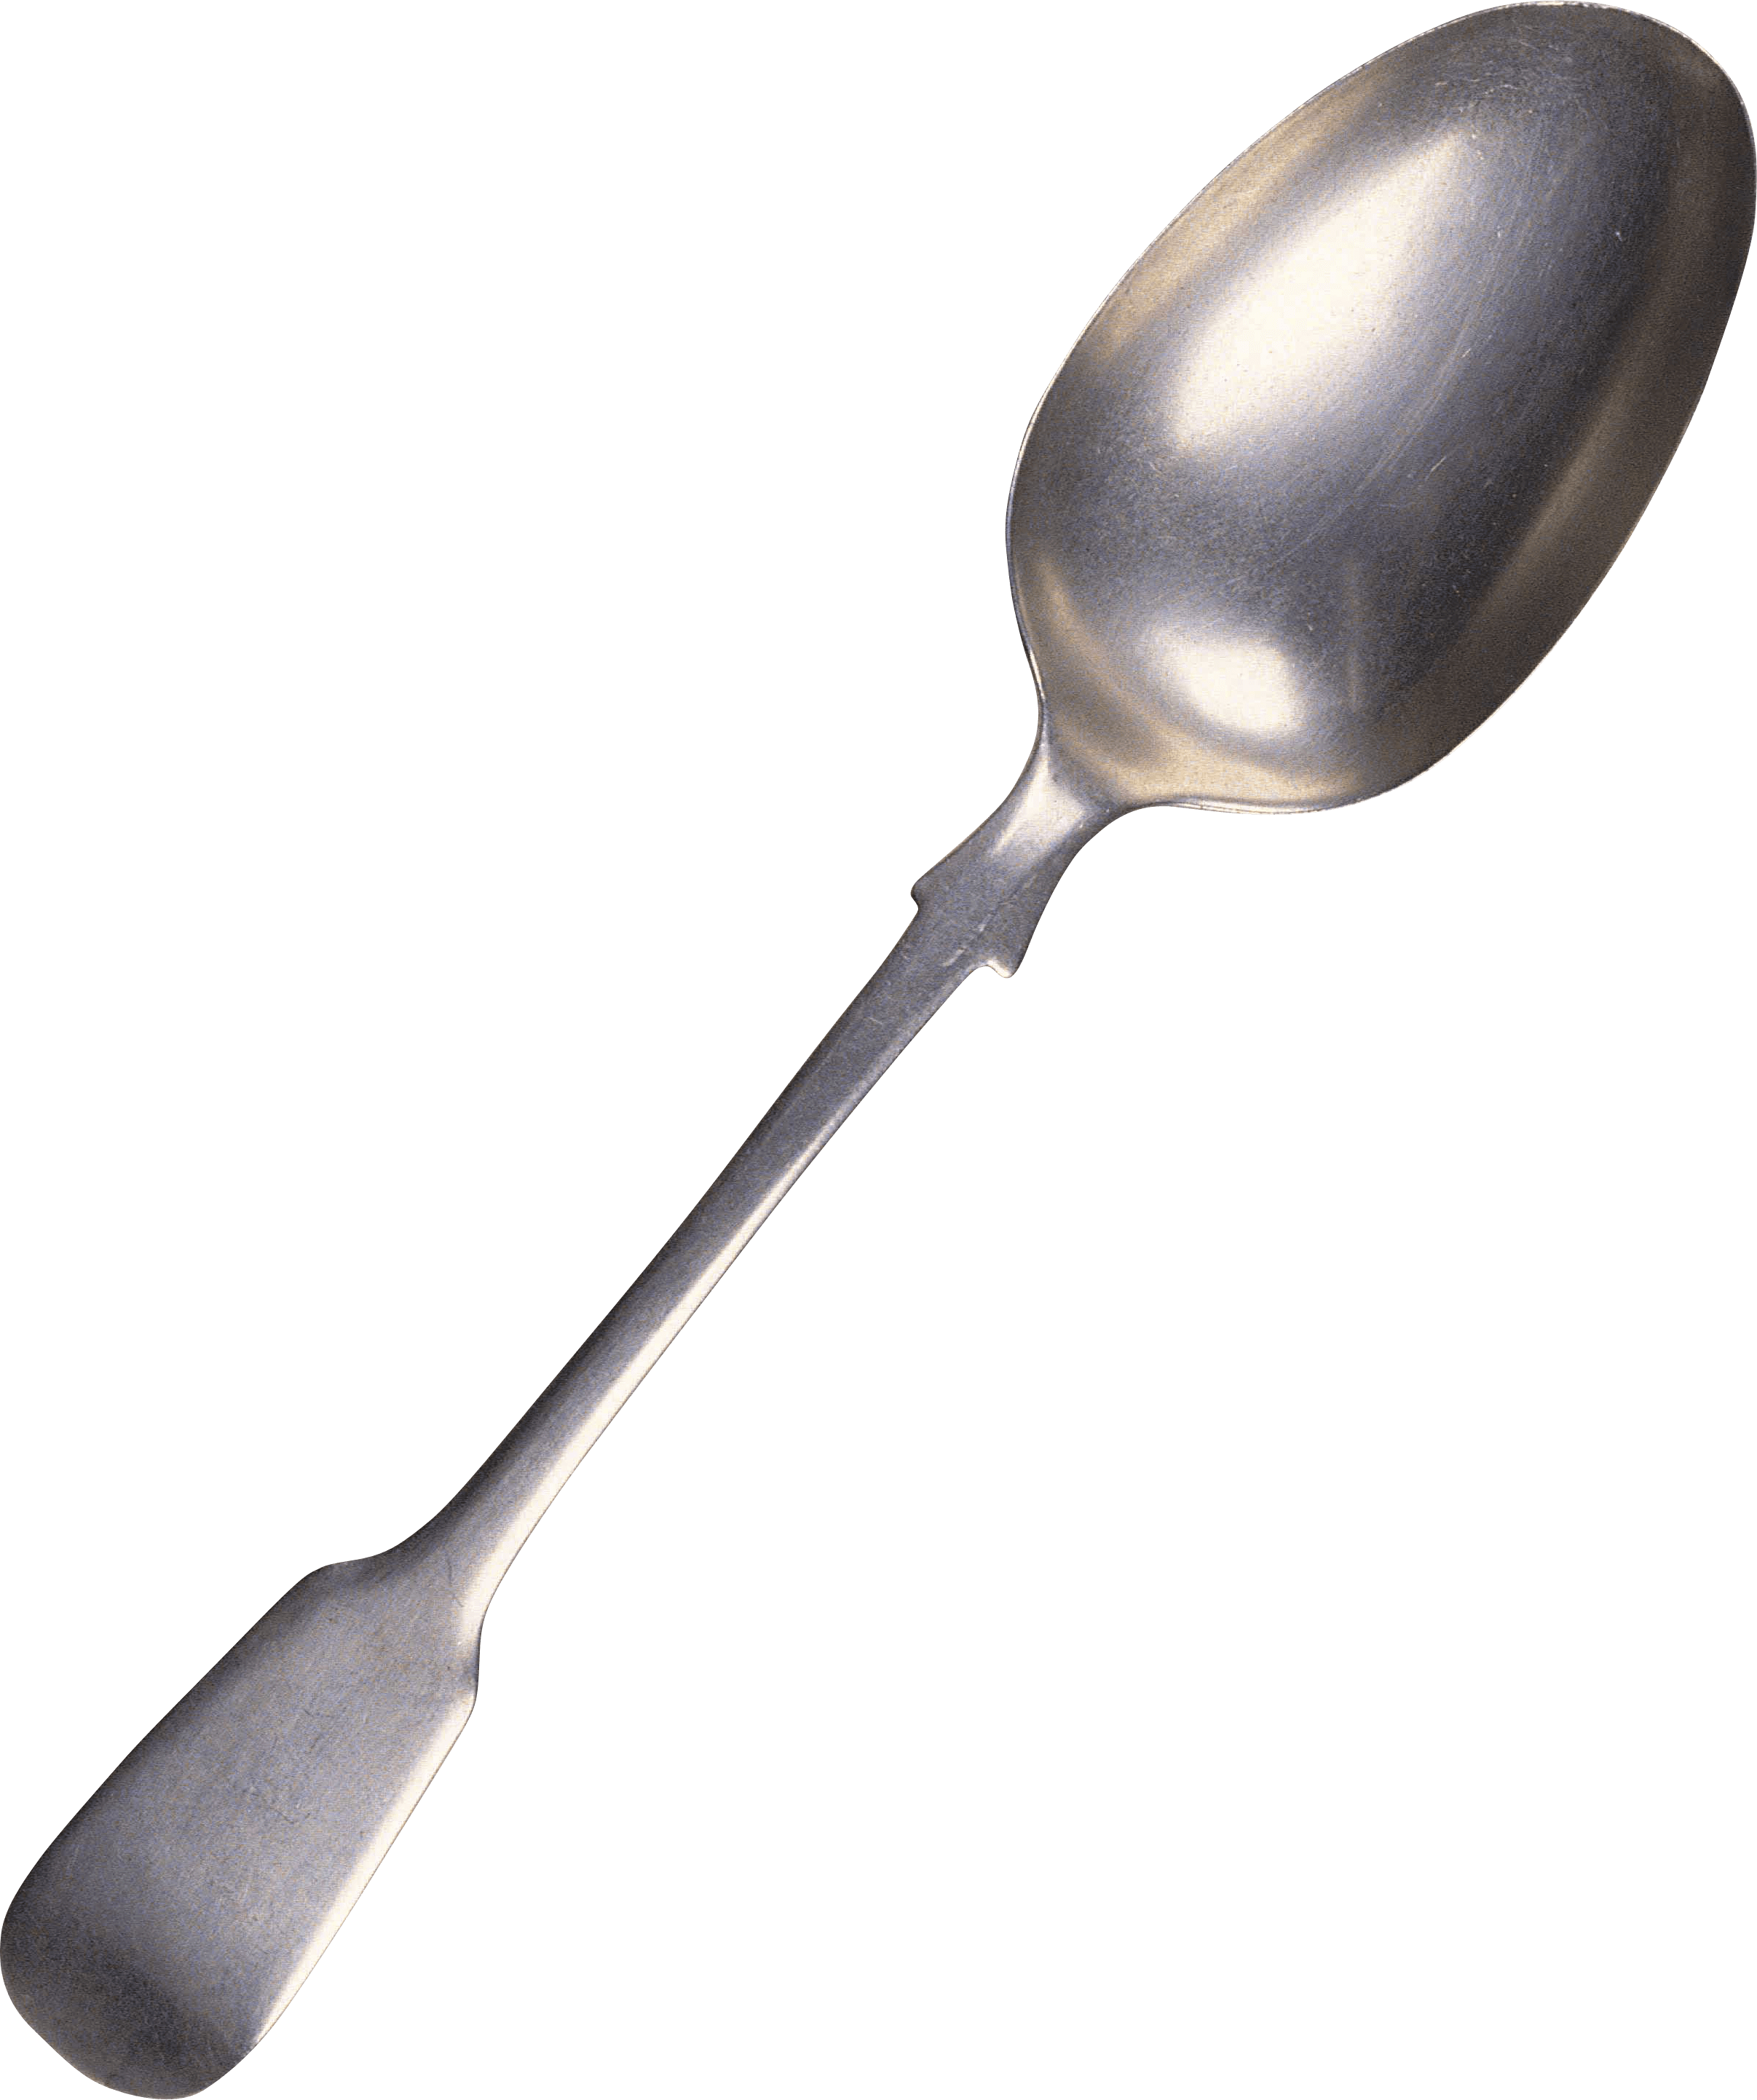 Just a Spoon